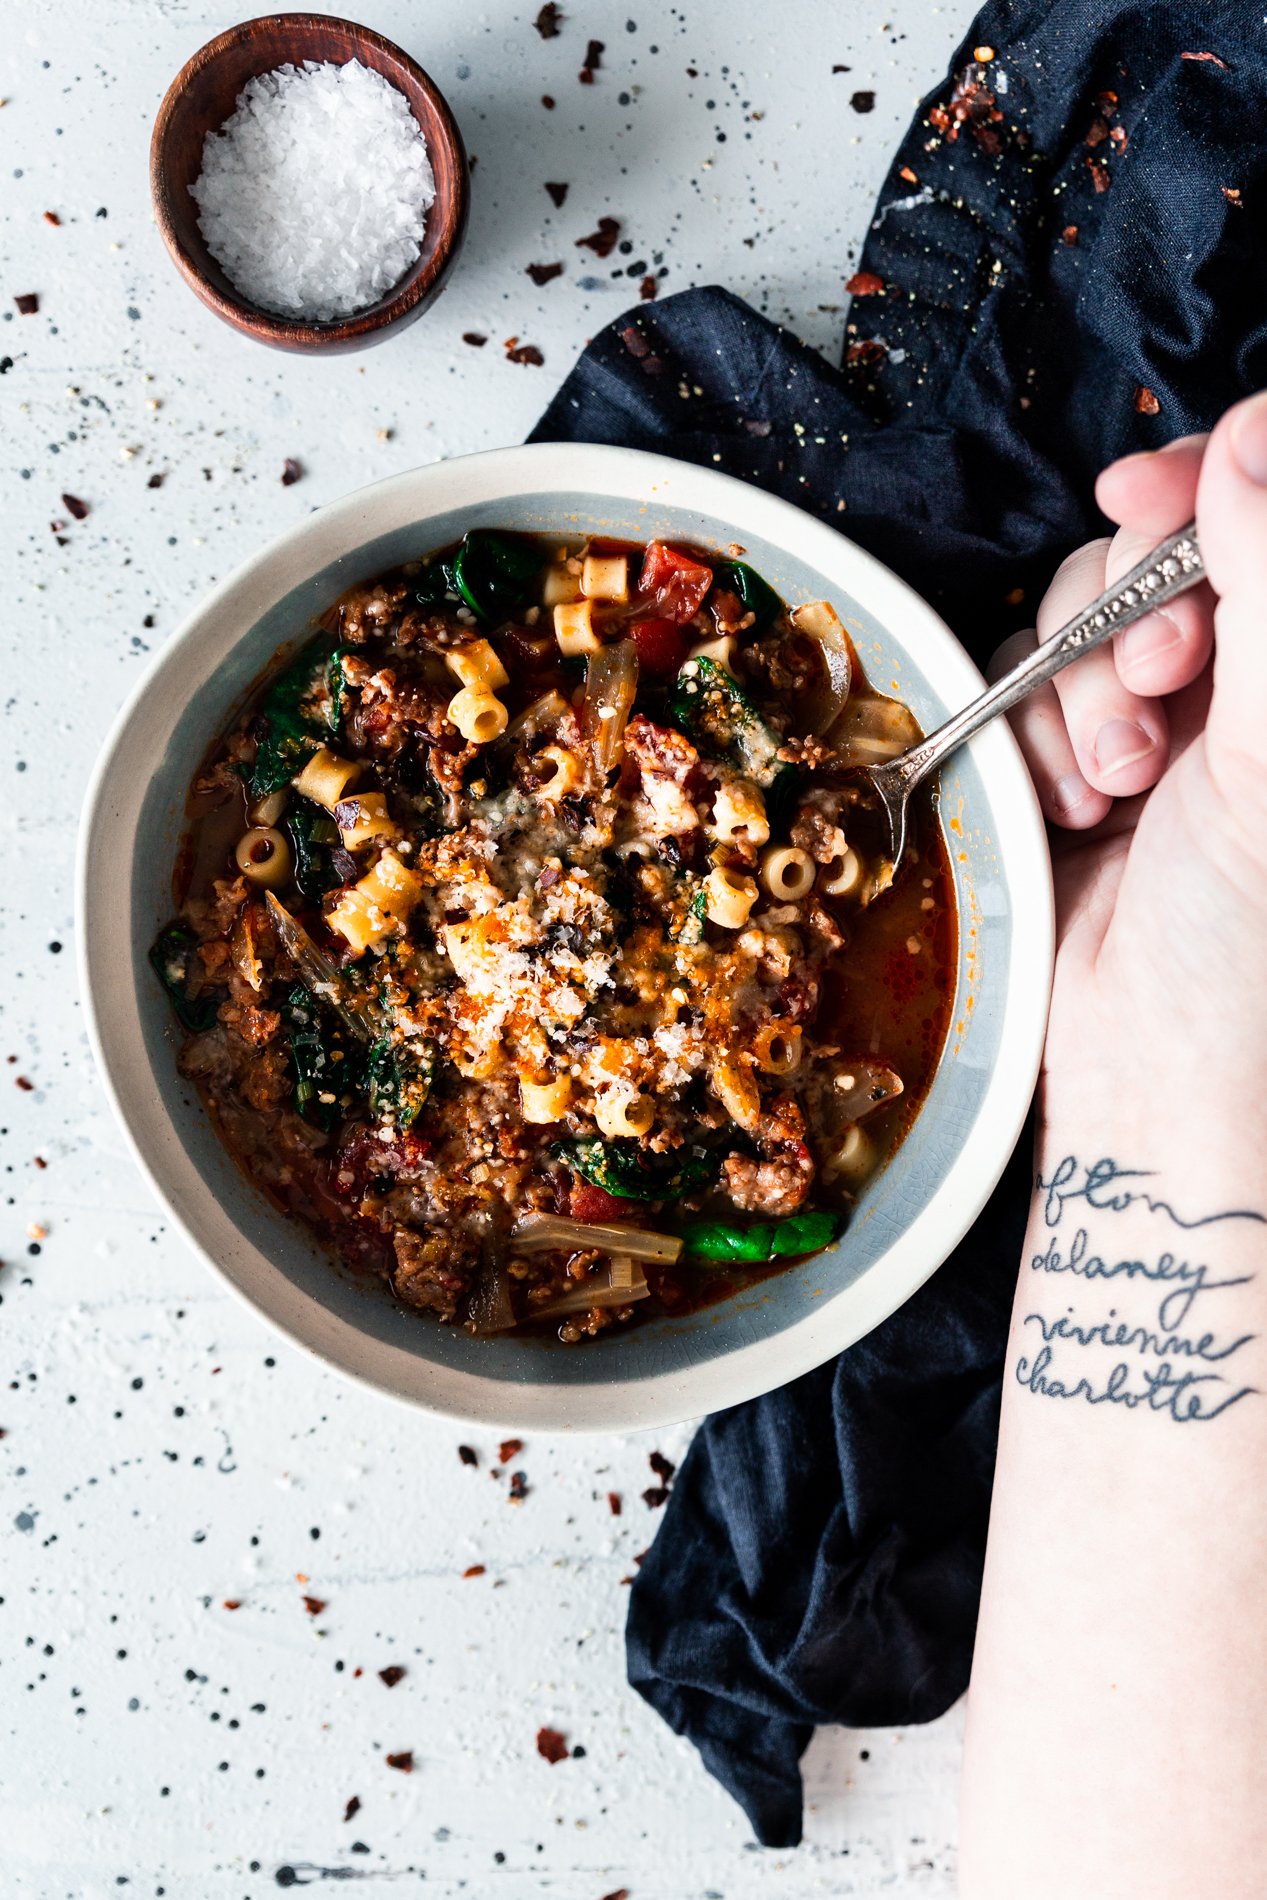 overhead view of a bowl of italian sausage soup with spinach, pasta, and caramelized fennel from minnesota food blogger a simple pantry. a small bowl of garnishing salt is toward the top of the image and an arm holds a spoon inside the bowl of soup.